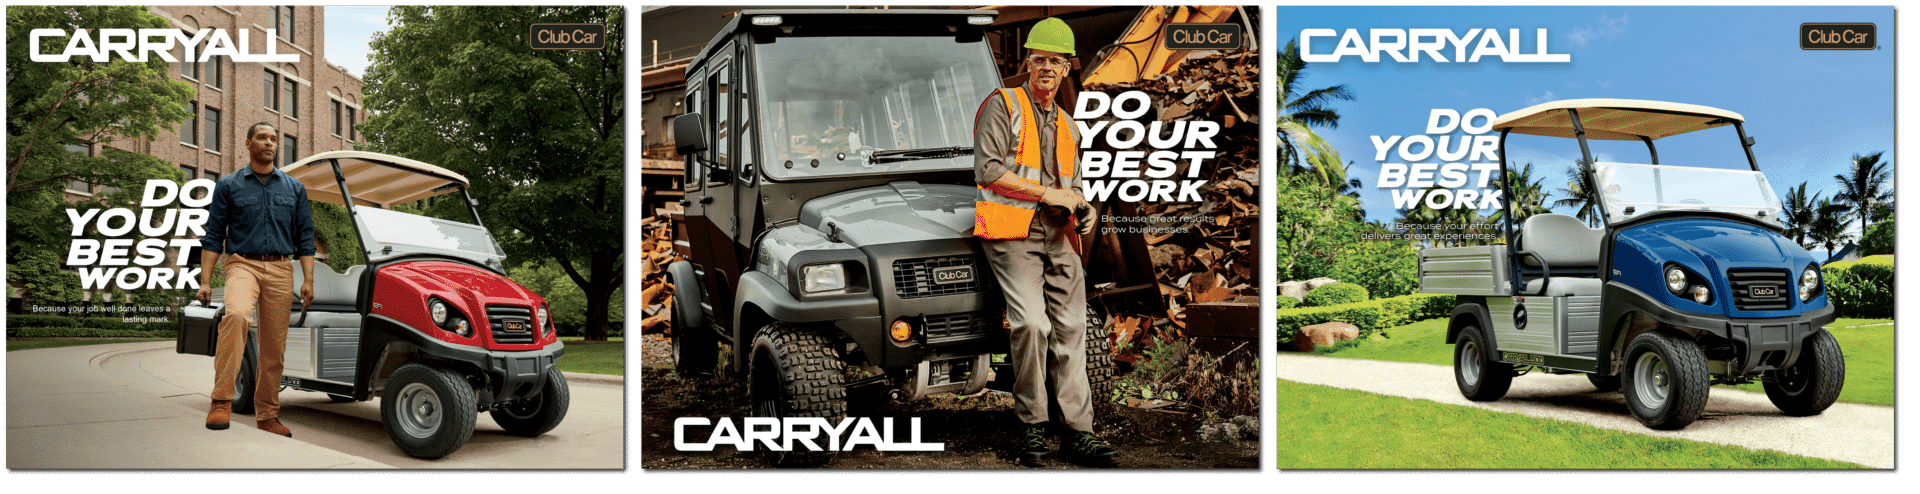 Club Car Carryall Utility Vehicles - Do your Best Work (combined)